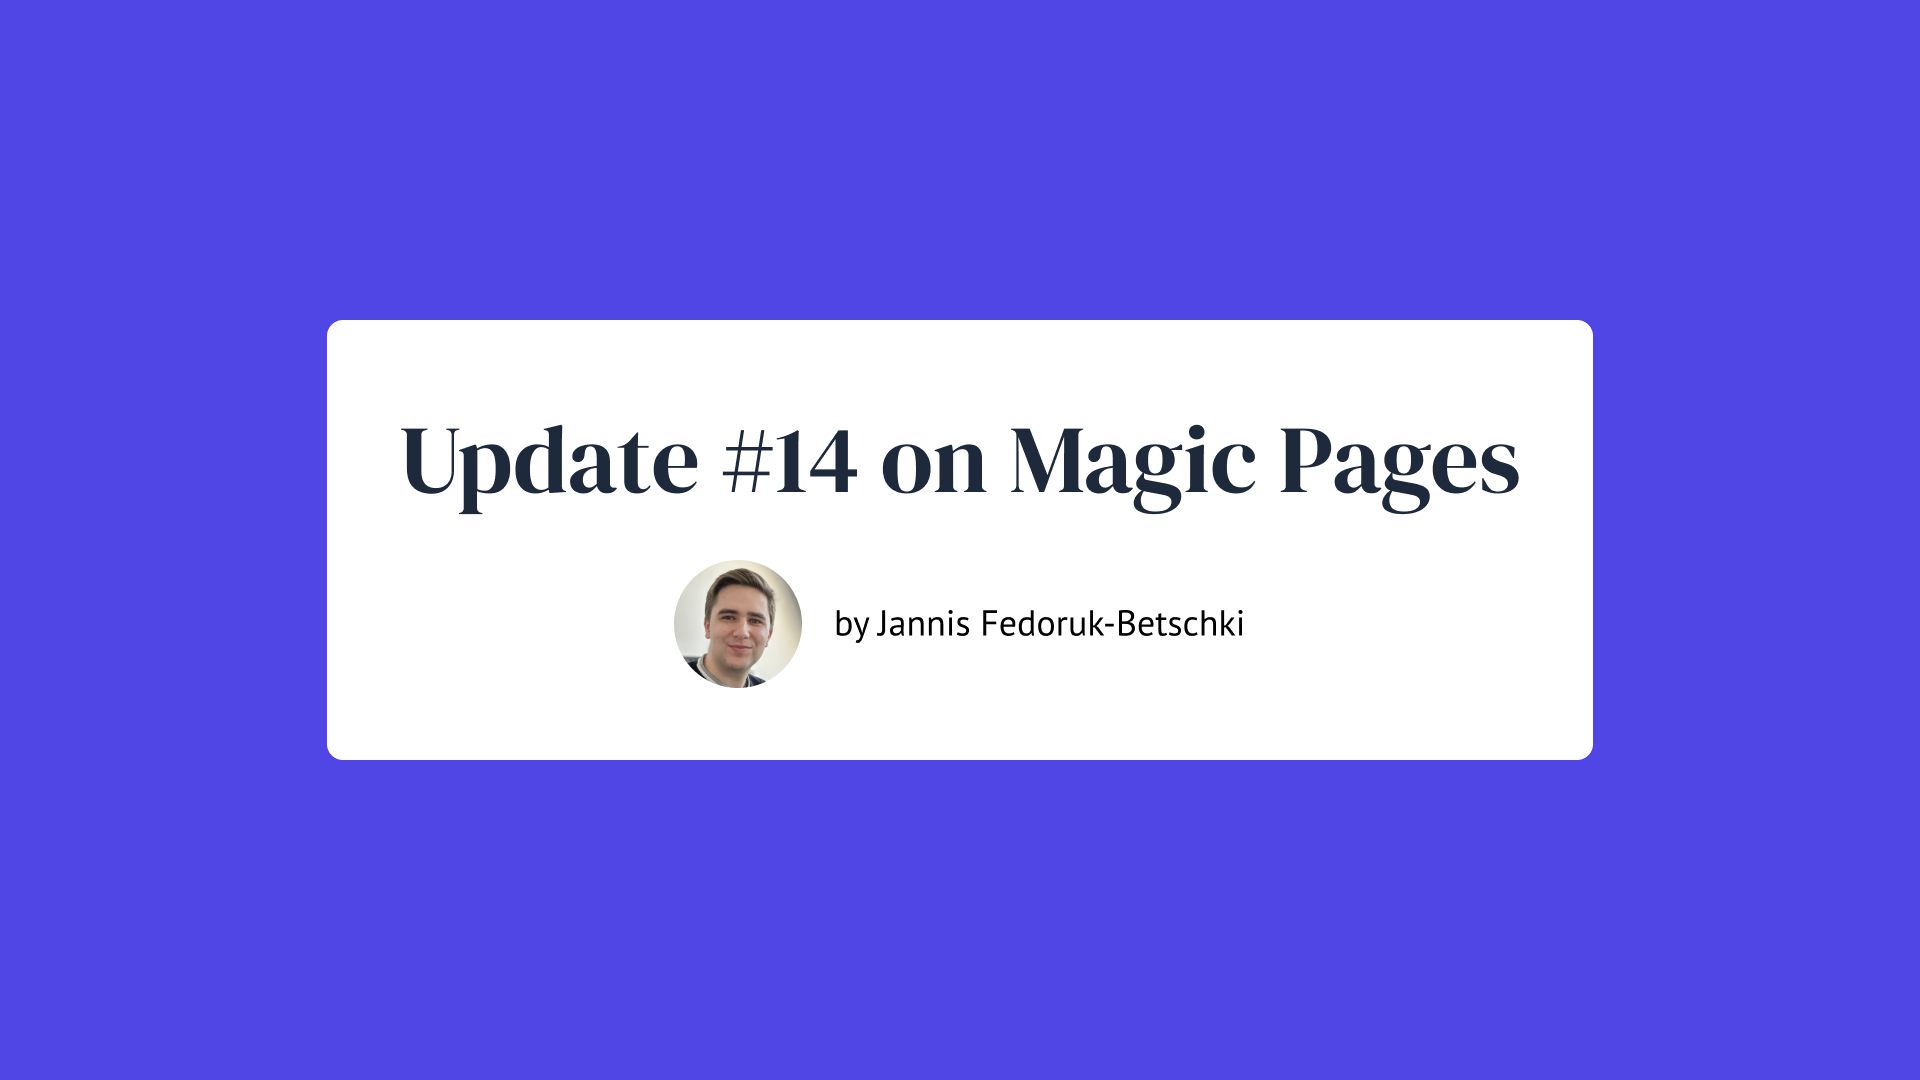 Update #14 on Magic Pages by Jannis Fedoruk-Betschki